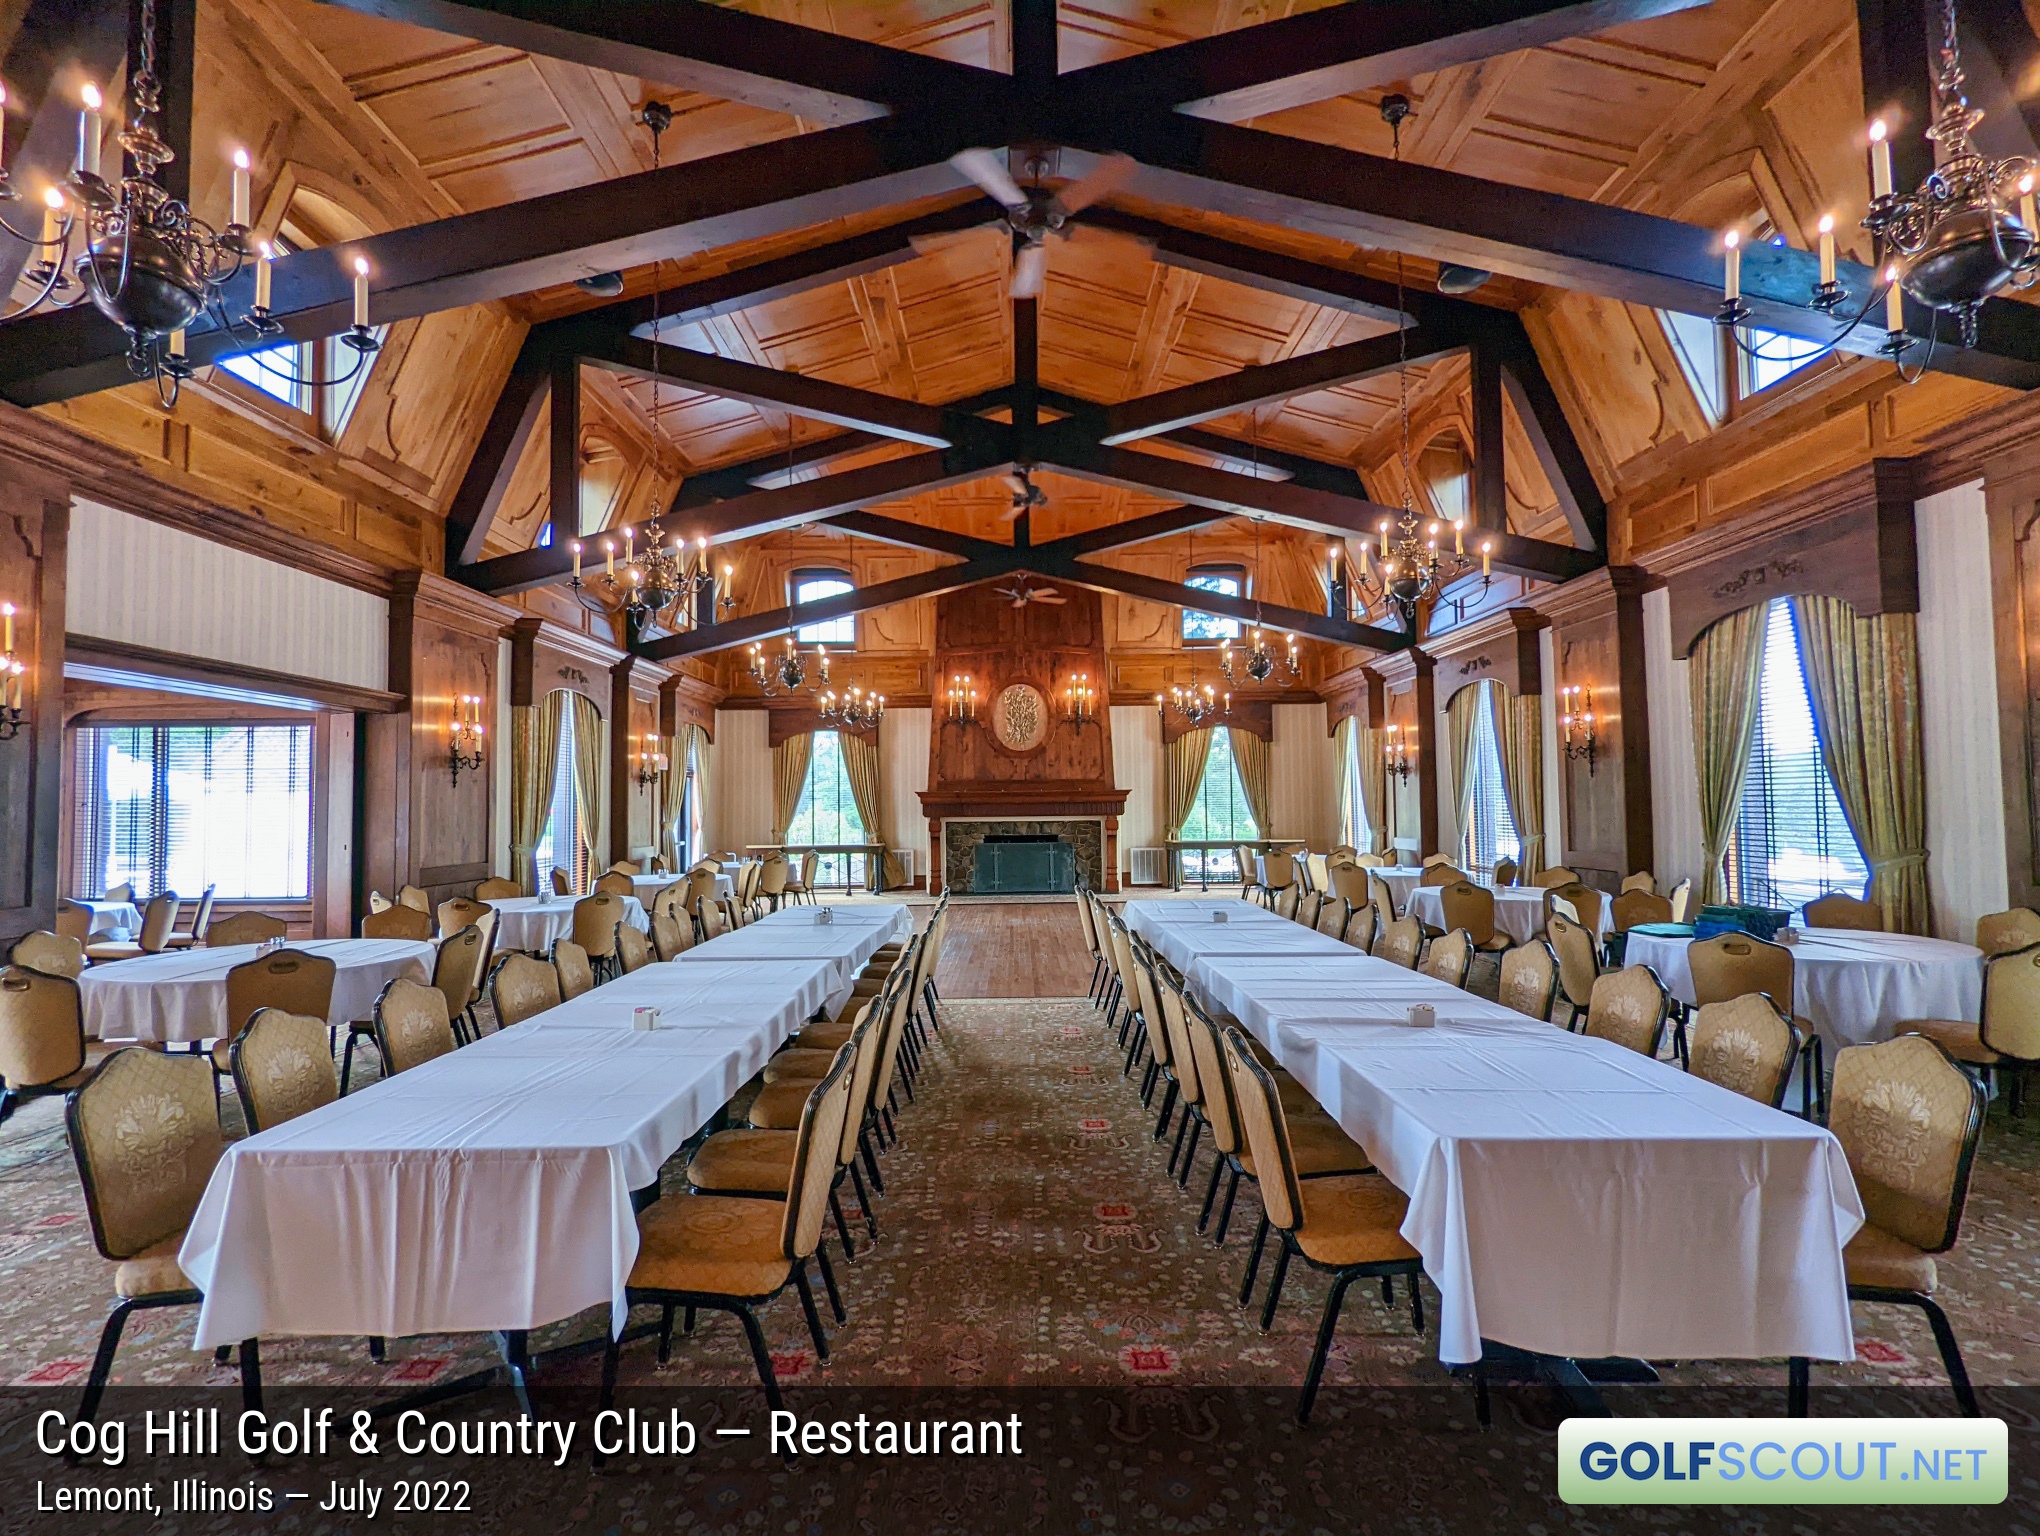 Photo of the restaurant at Cog Hill Course #1 in Lemont, Illinois. The beautiful main dining hall at Cog Hill's clubhouse.